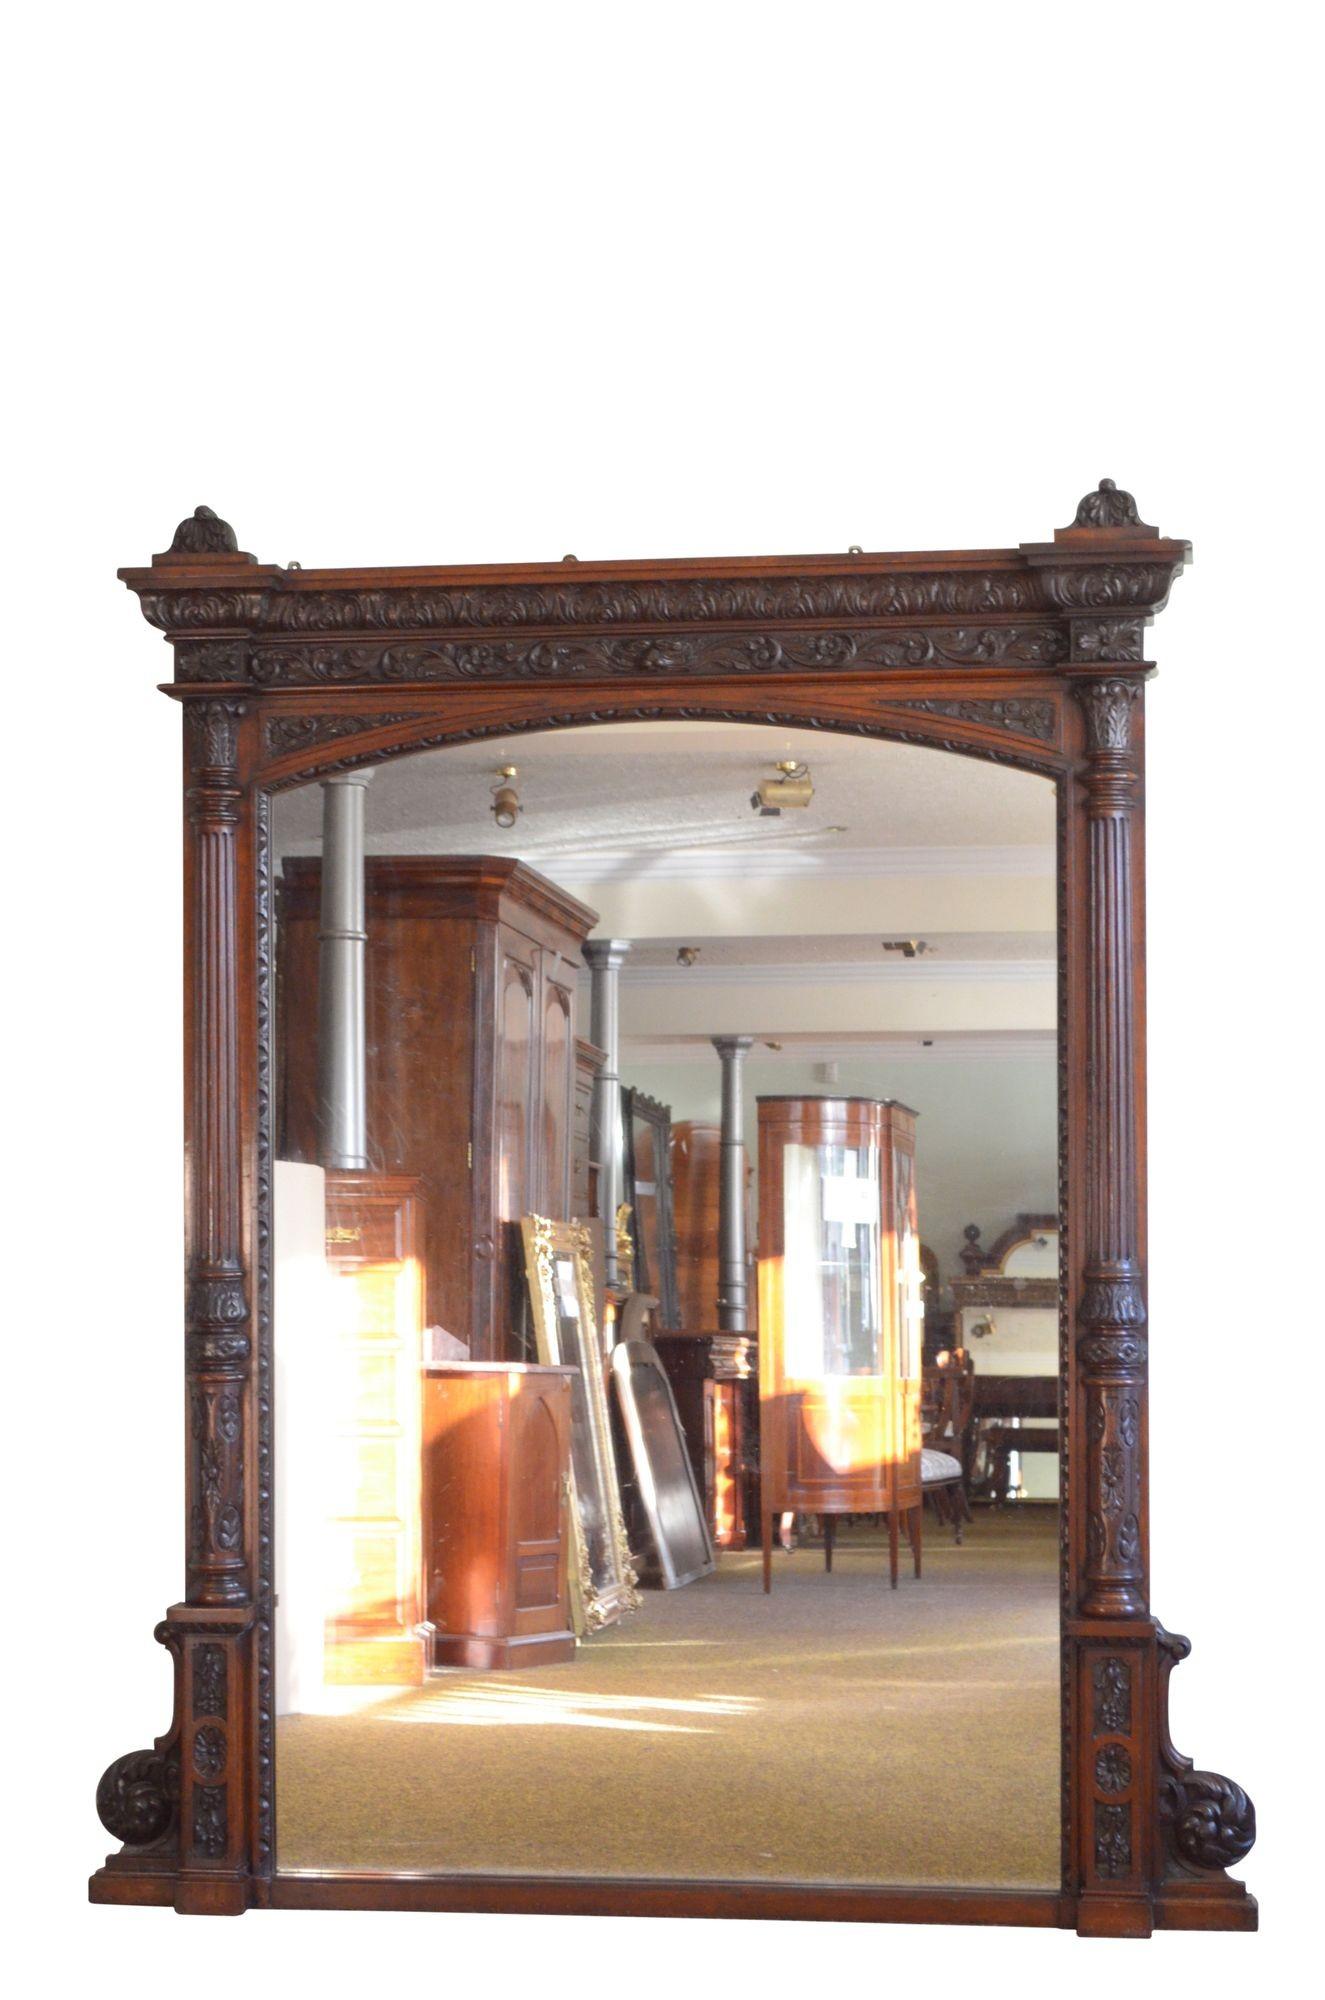 P0277 A monumental 19th century solid oak mirror, having foliage carved cavetto cornice with decorative carved bell shaped finials above acanthus leaf carved frieze and egg and dart carved inner edge enclosing original glass with some foxing, all